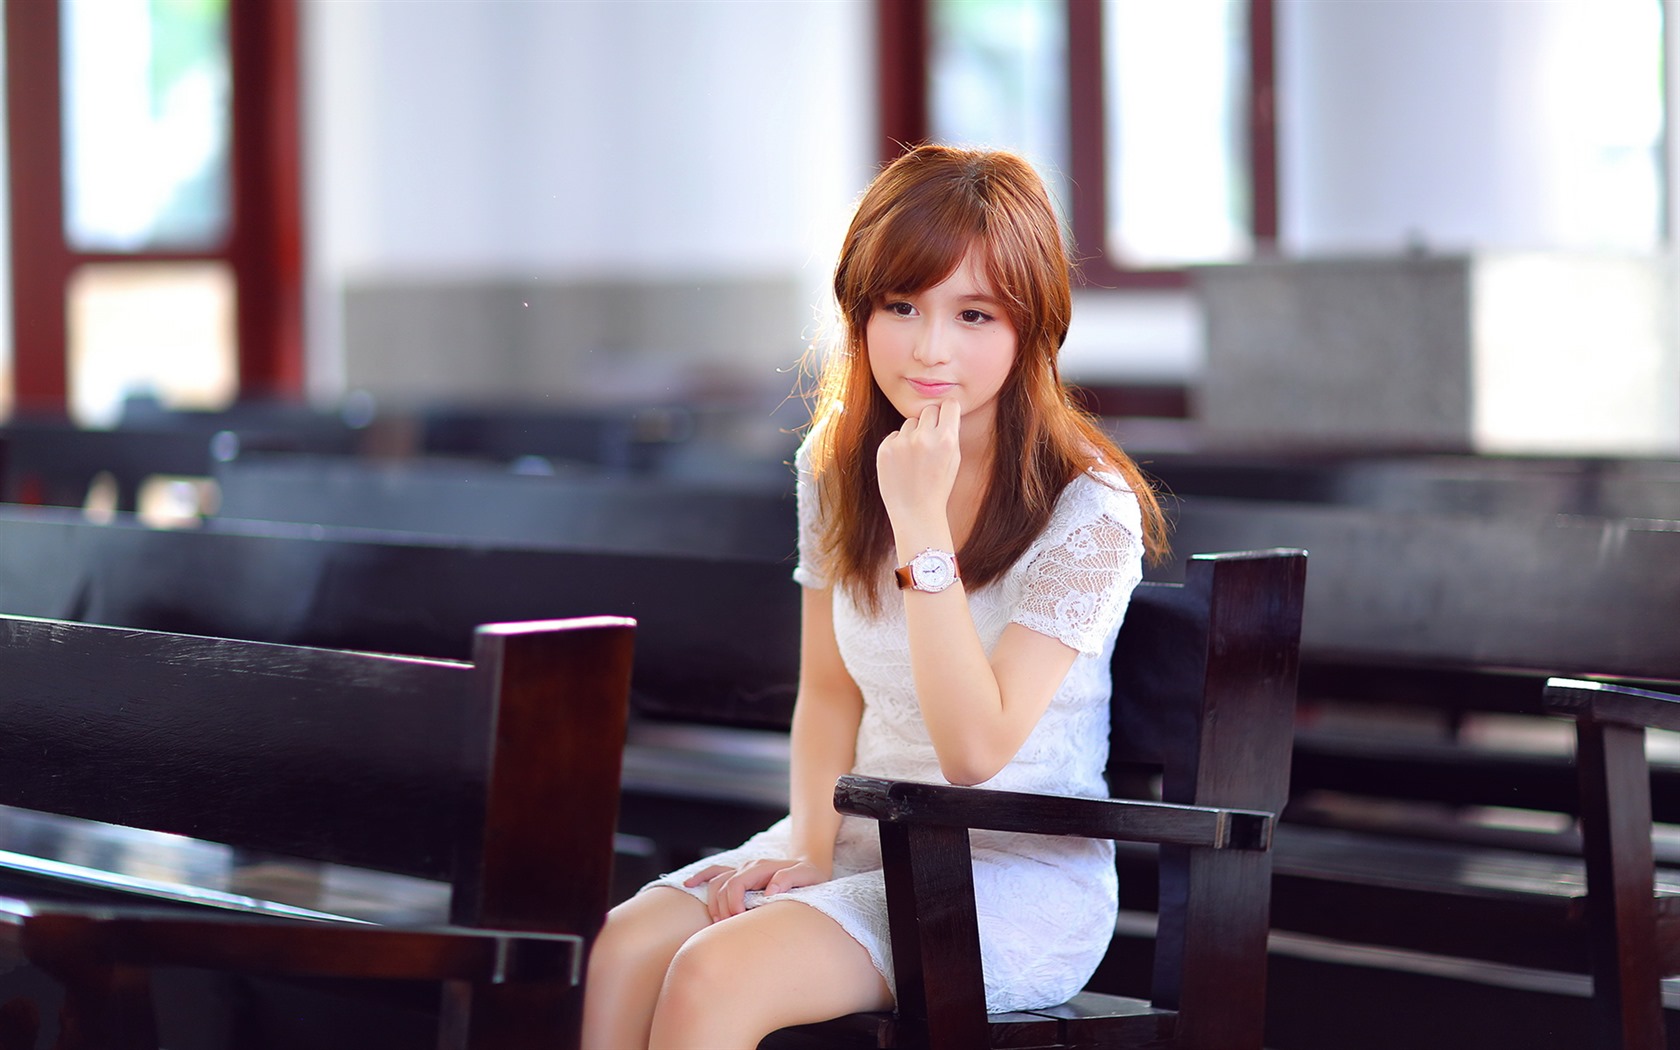 Pure and lovely young Asian girl HD wallpapers collection (2) #37 - 1680x1050